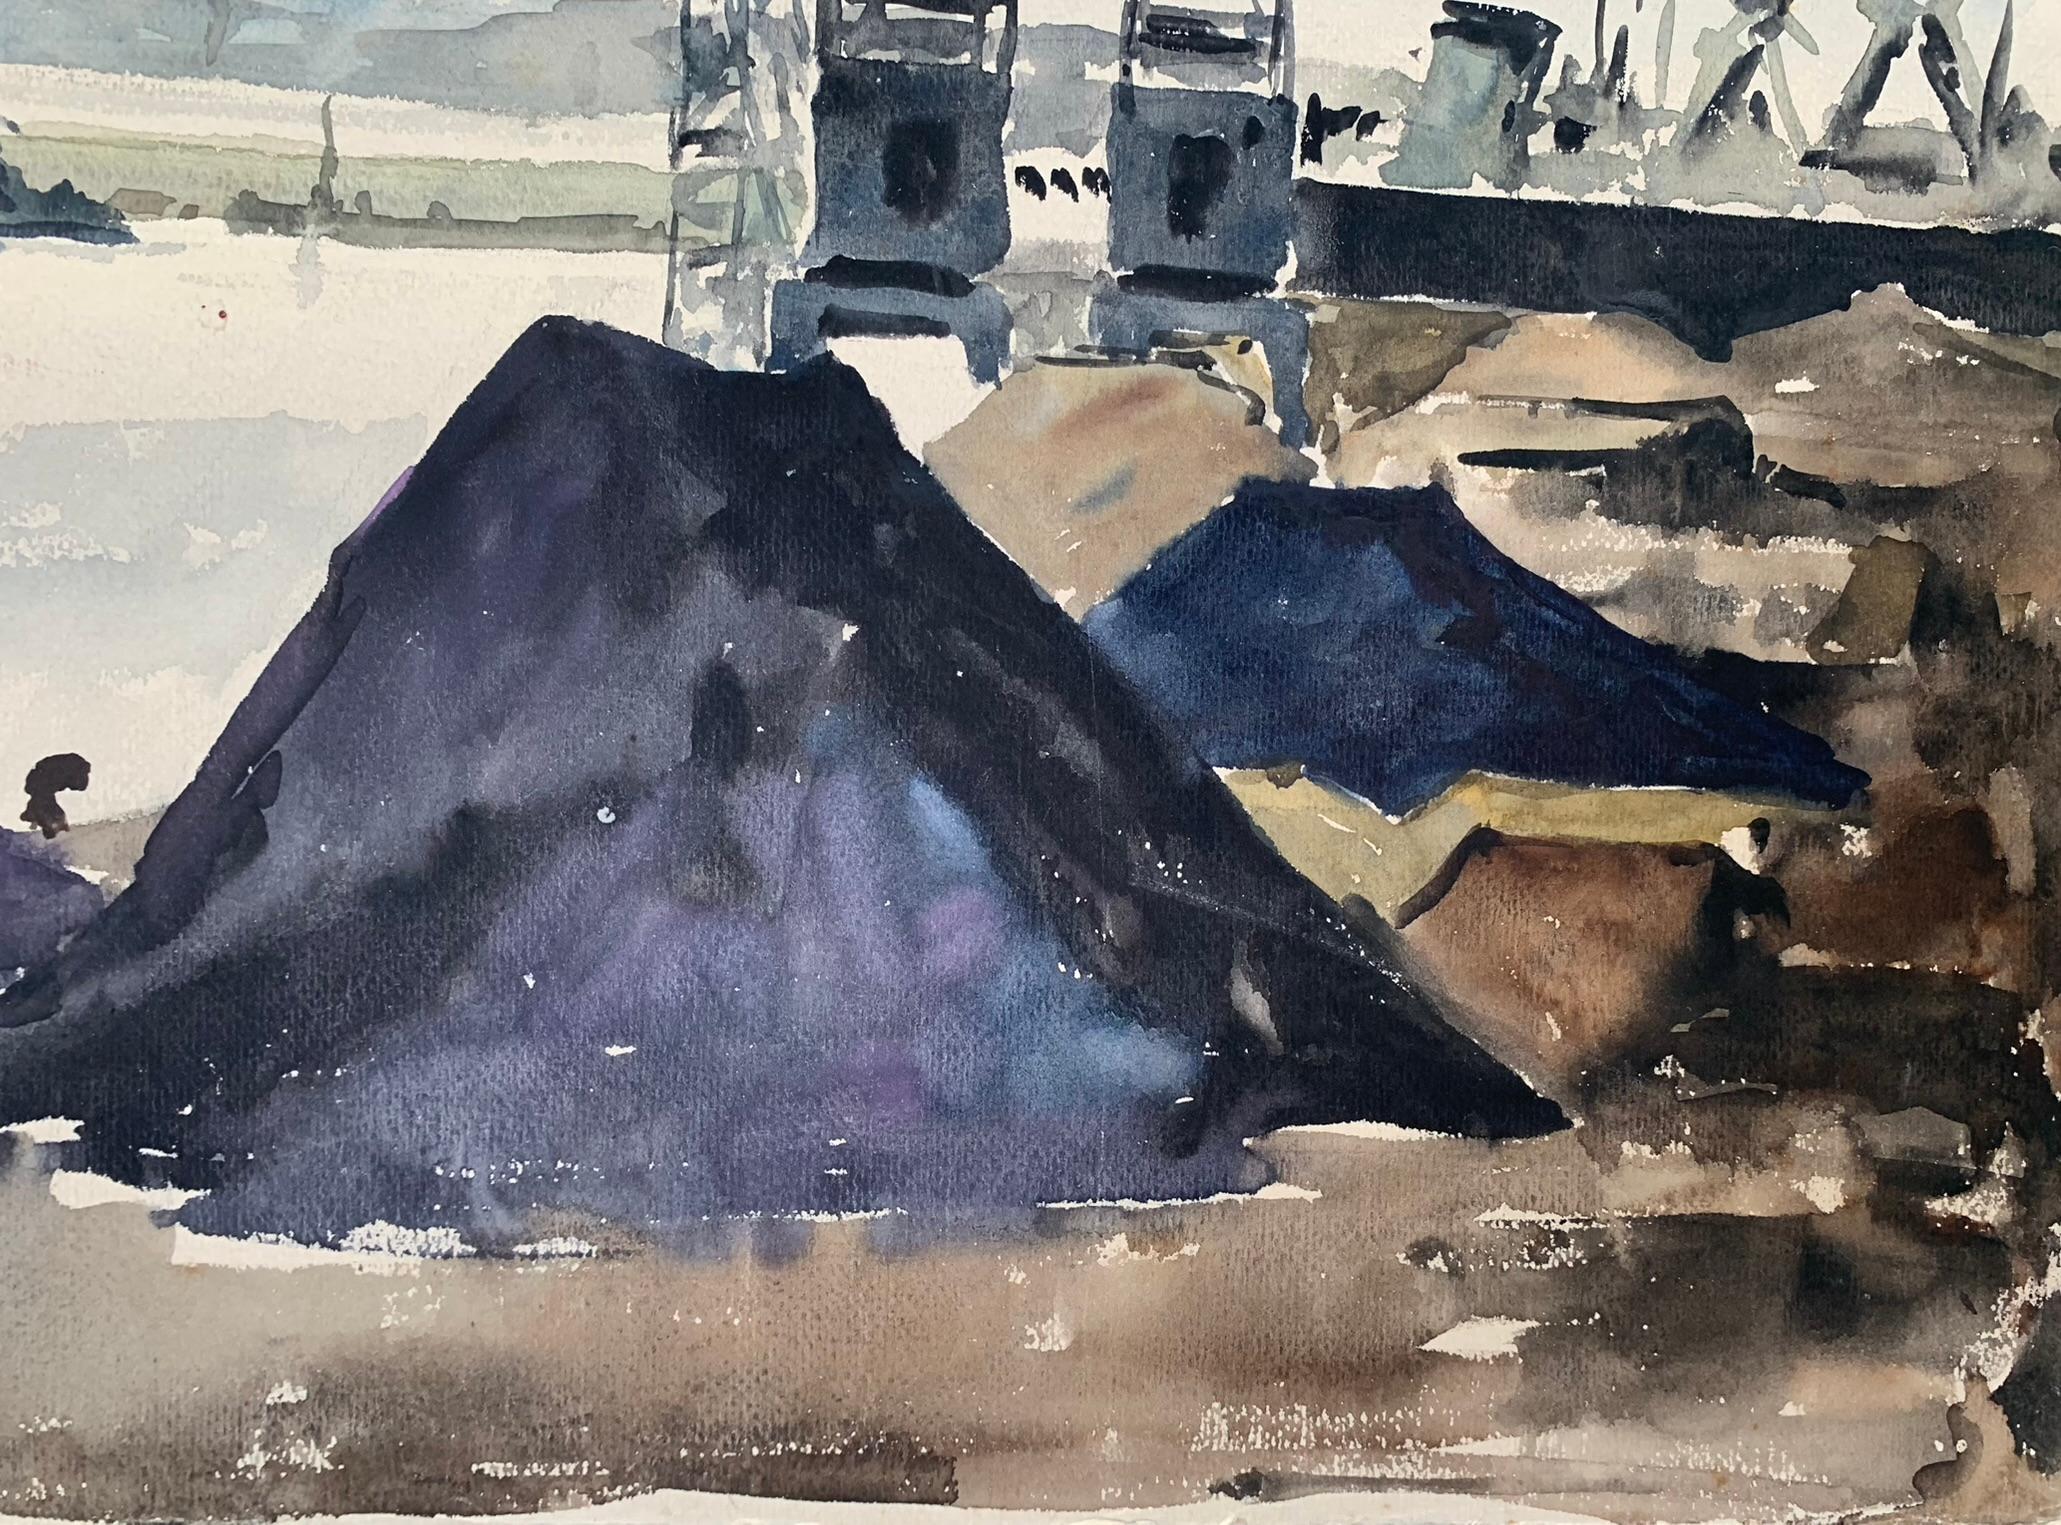 The port of Terragon.
Watercolor on paper.
Circa 1940-1950.
Painted on rough watercolor paper, Canson & Montgolfier, old French paper manufacturer.

The chromatic range is played in grays, indigo blues and browns. These earthy and cold colors